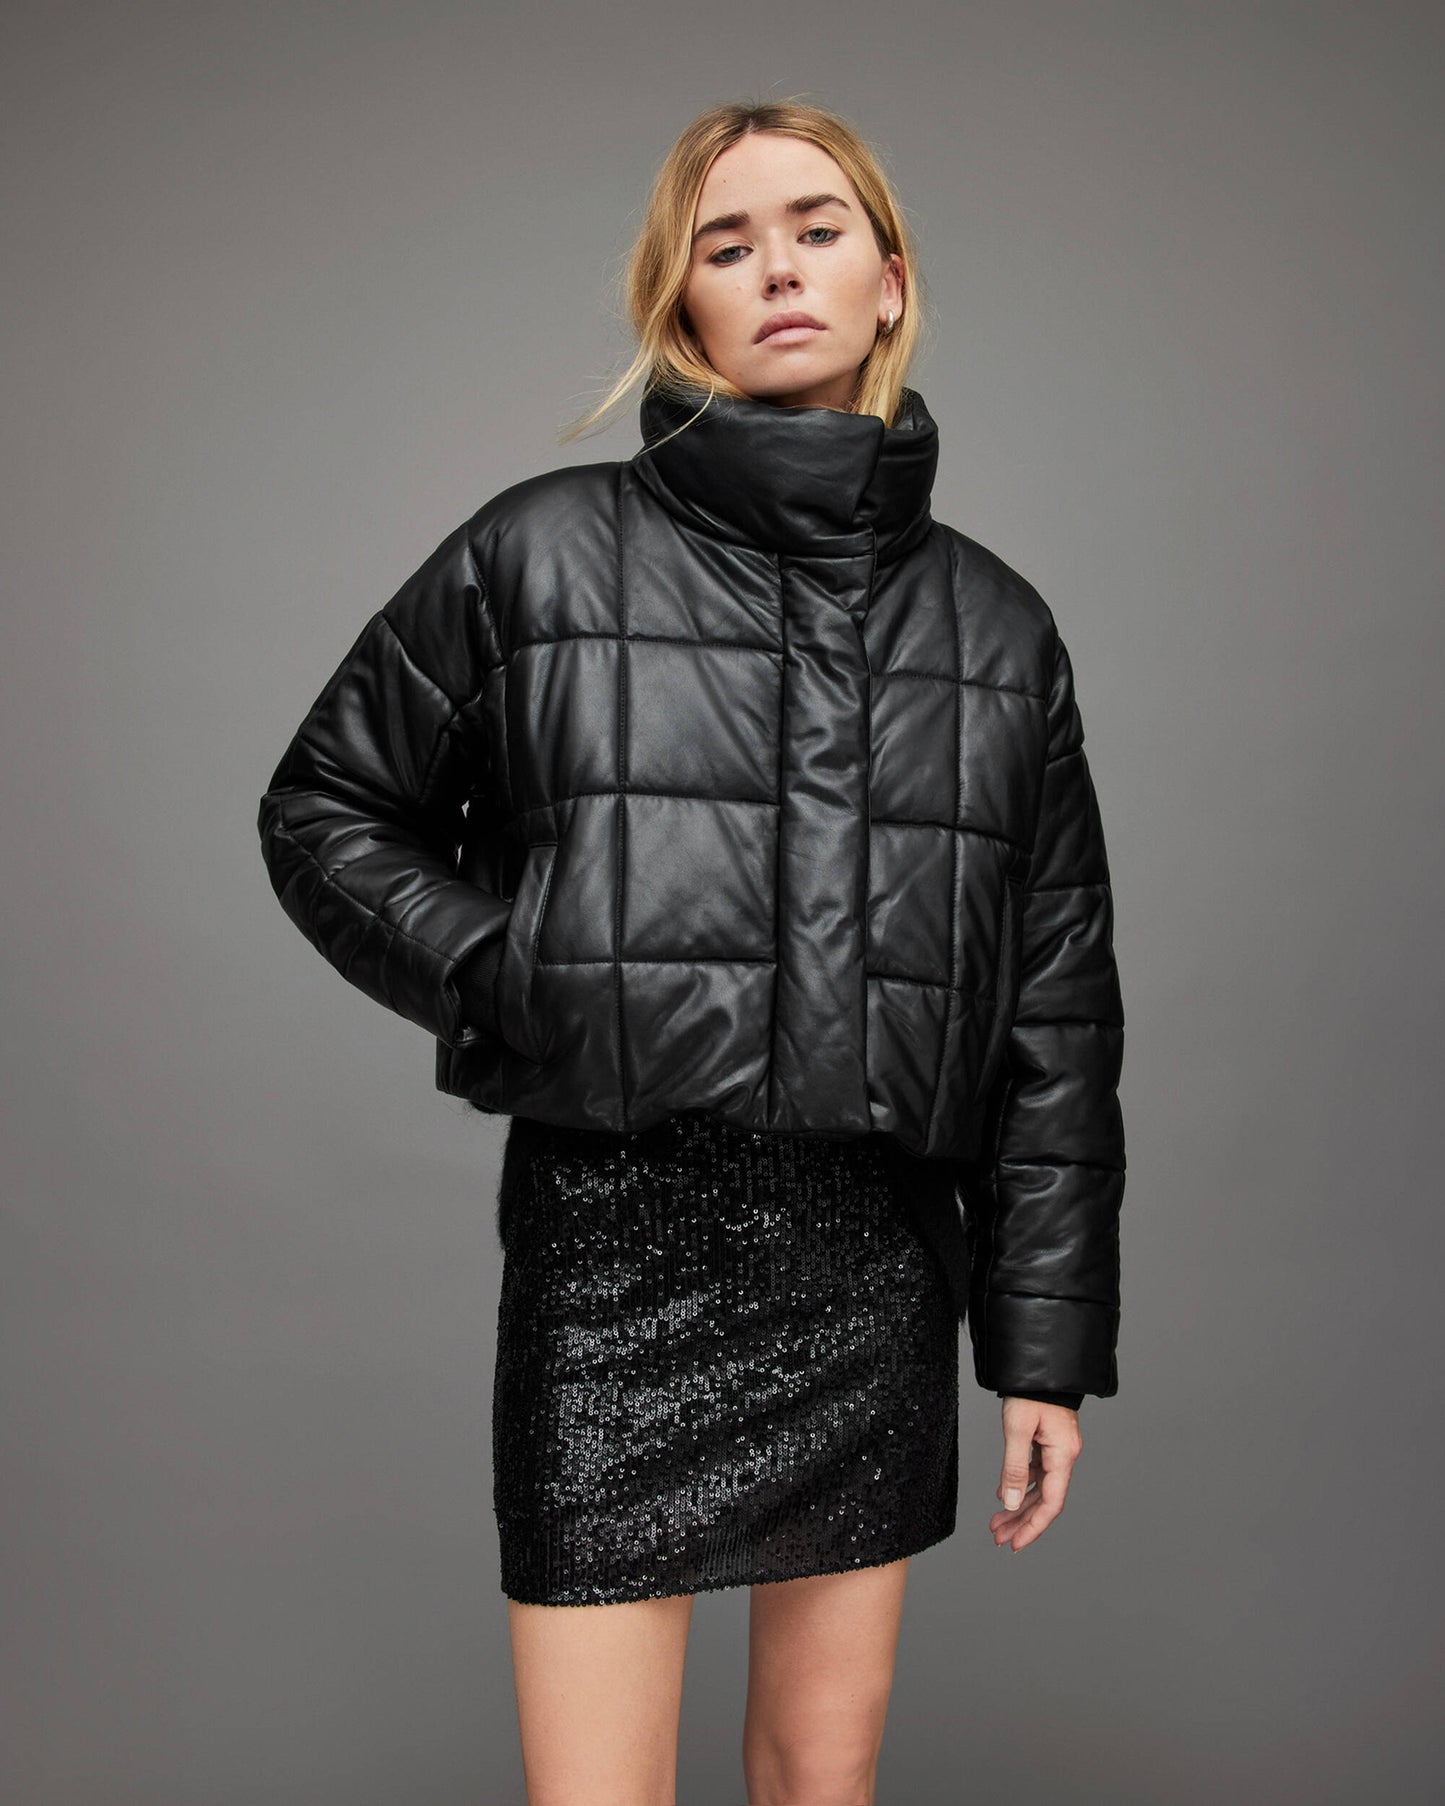 Women's Black Puffer Leather Jacket With Turtle Neck